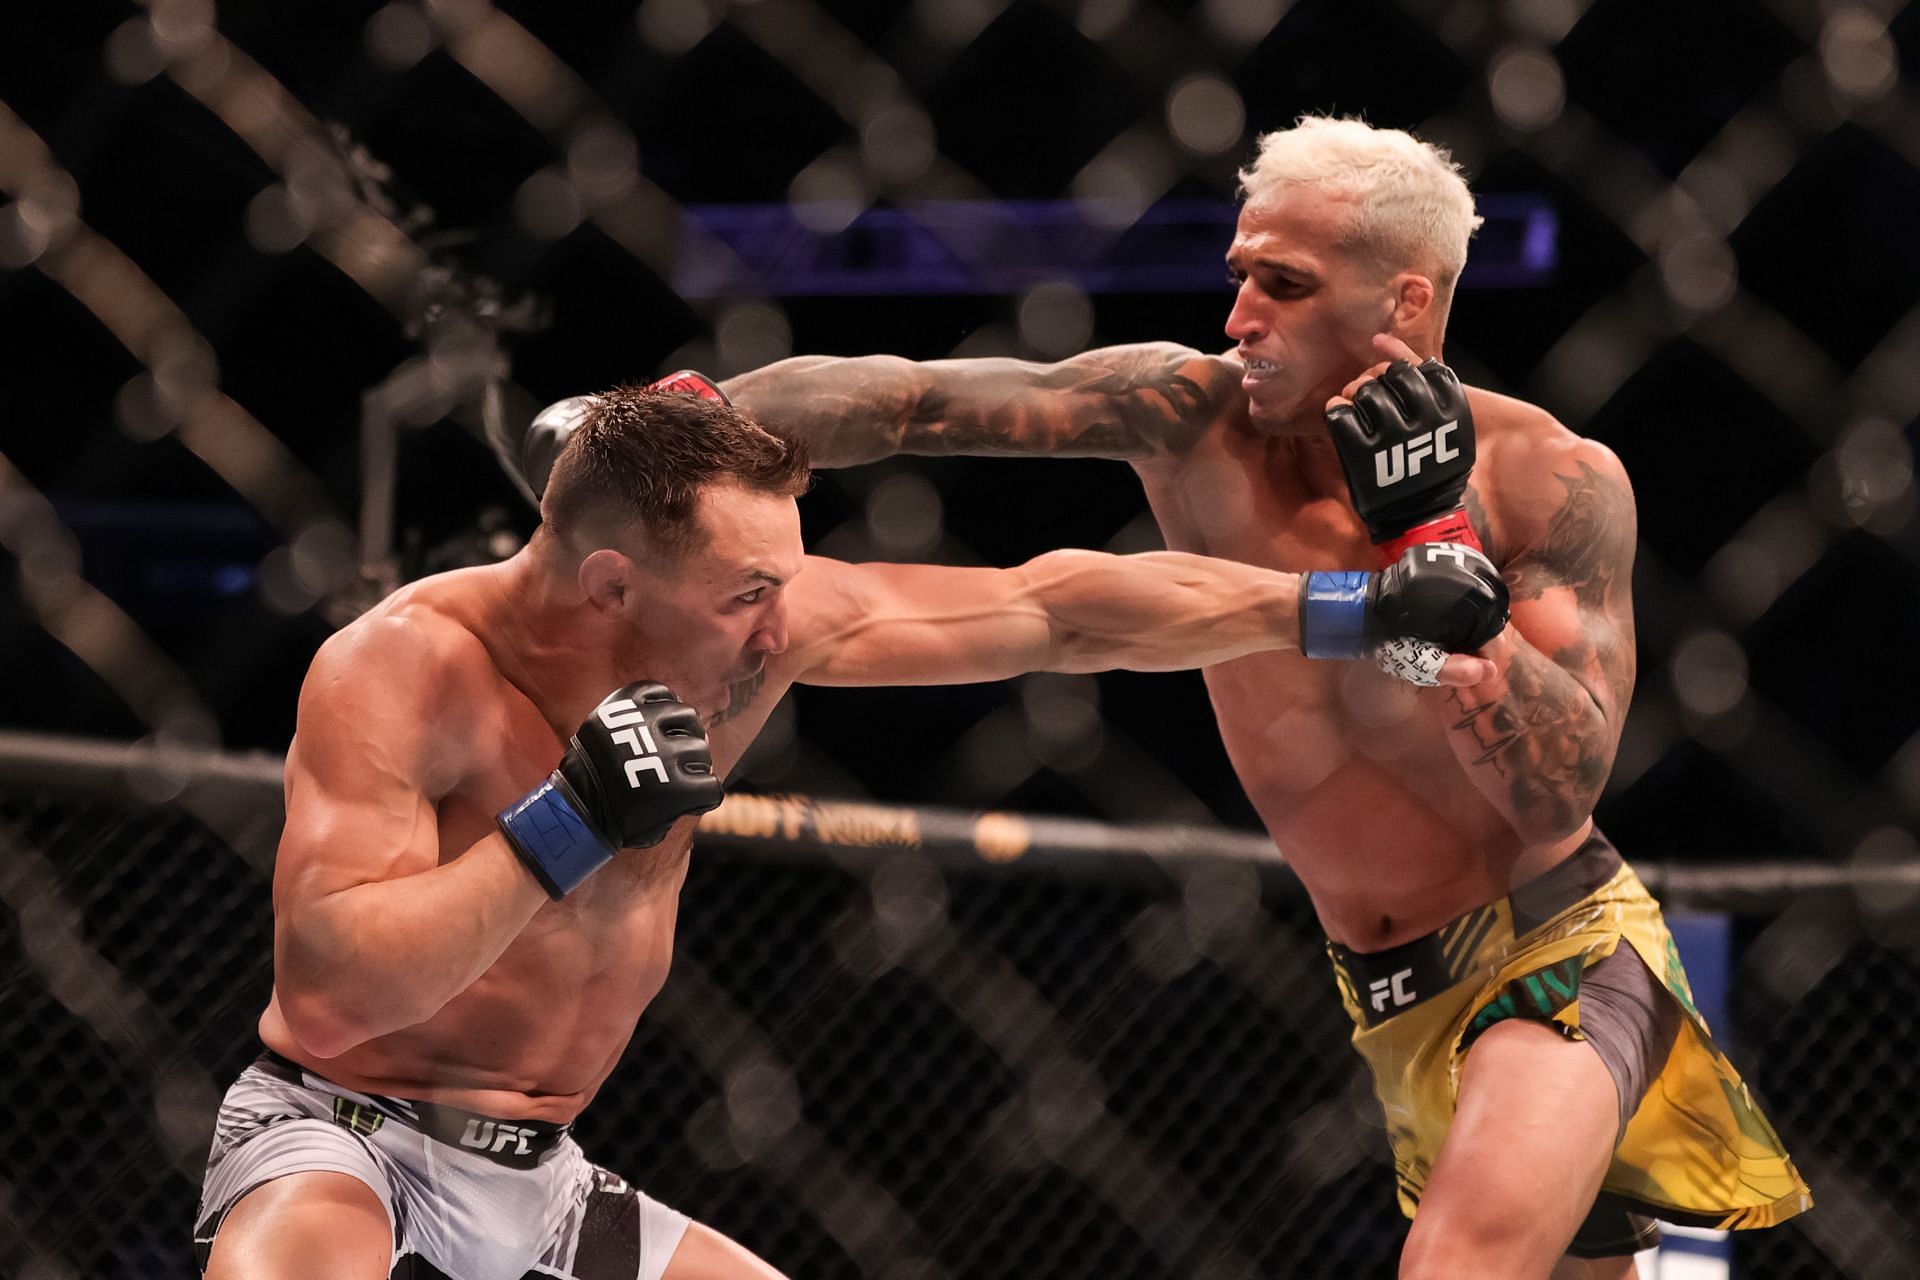 Charles Oliveira showed stunning toughness and durability to get past Michael Chandler and win UFC gold.